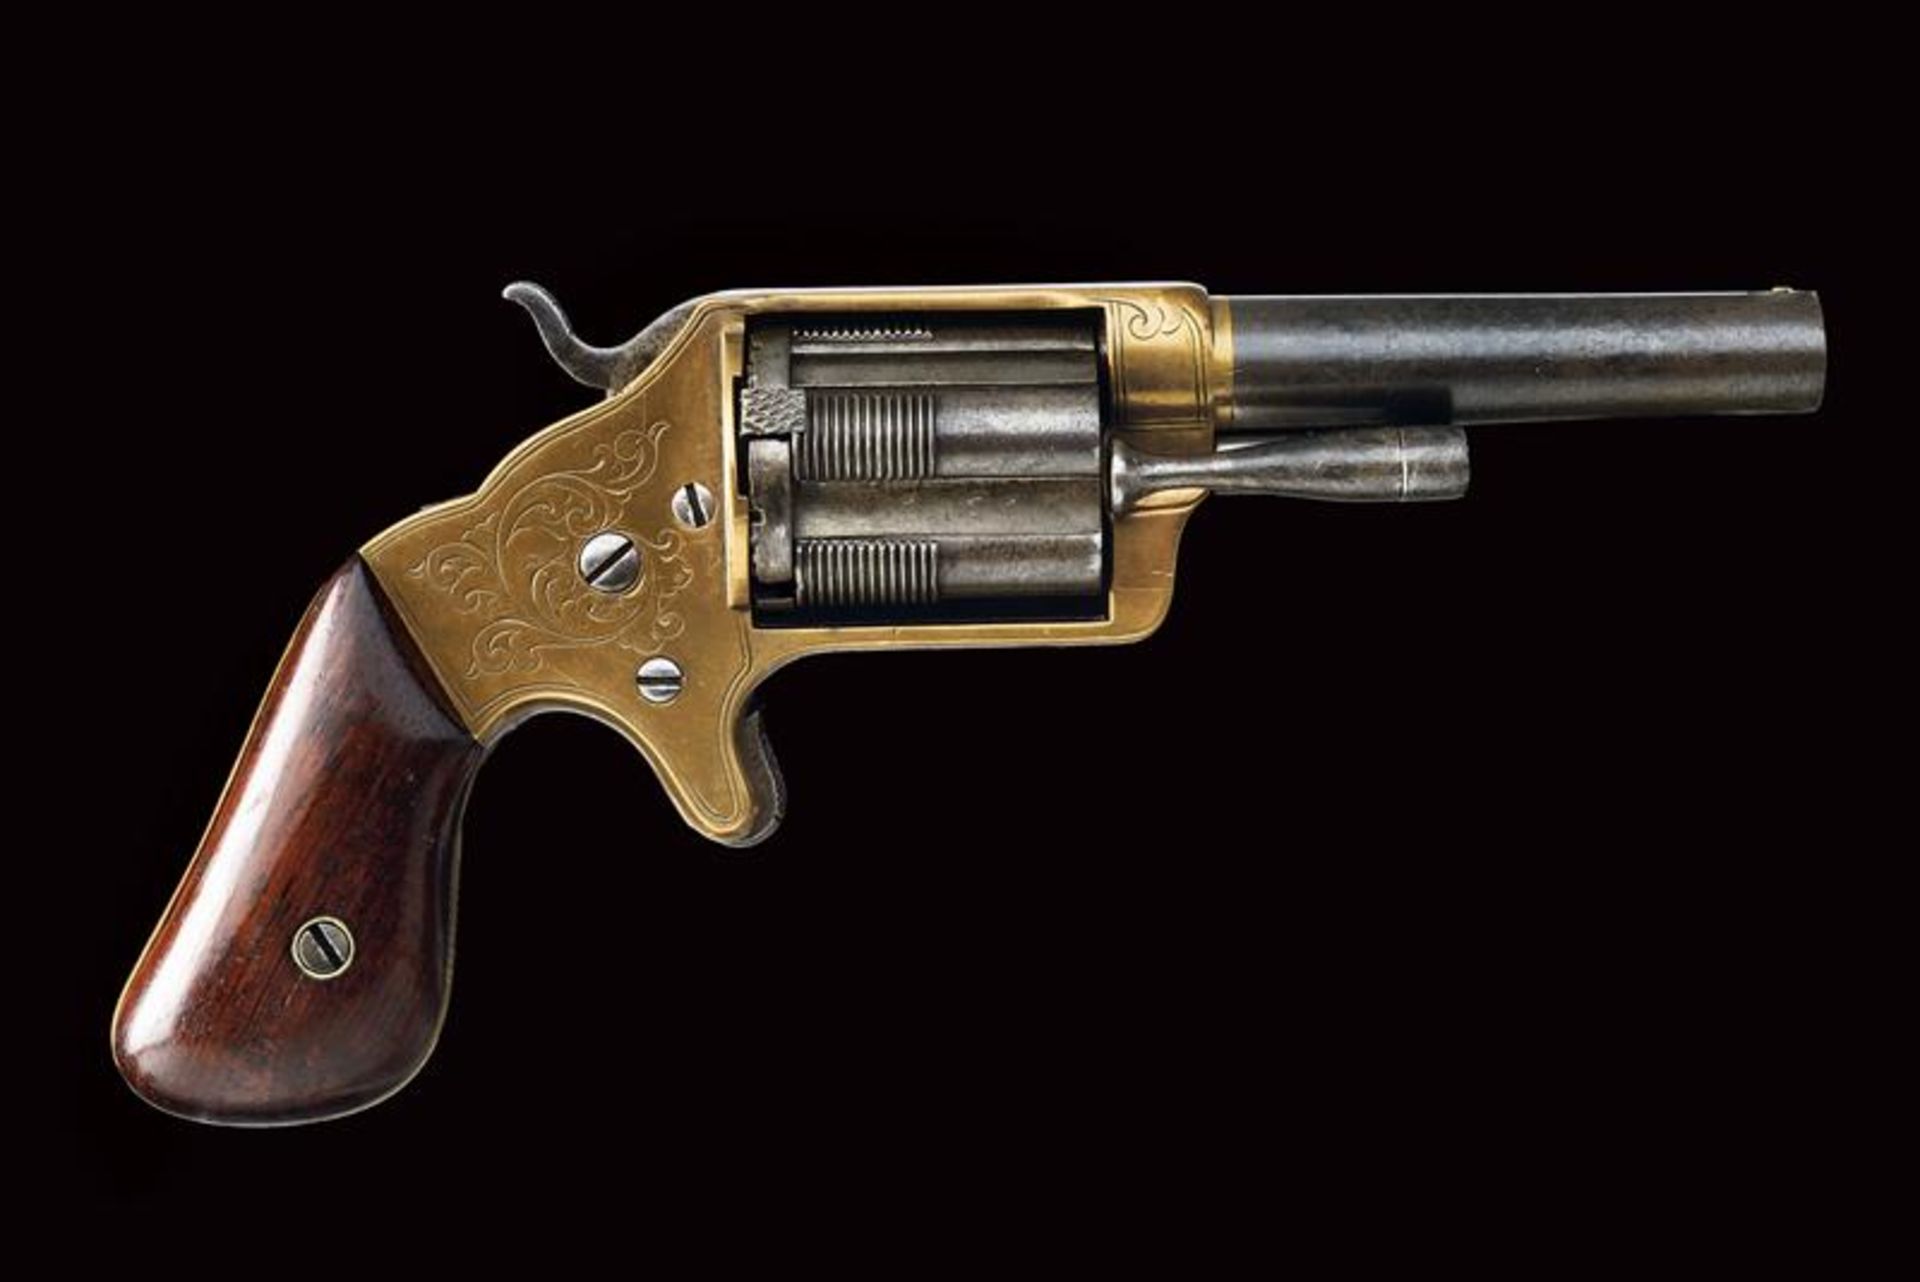 A Slocum Frontloading Pocket Revolver - Image 7 of 7